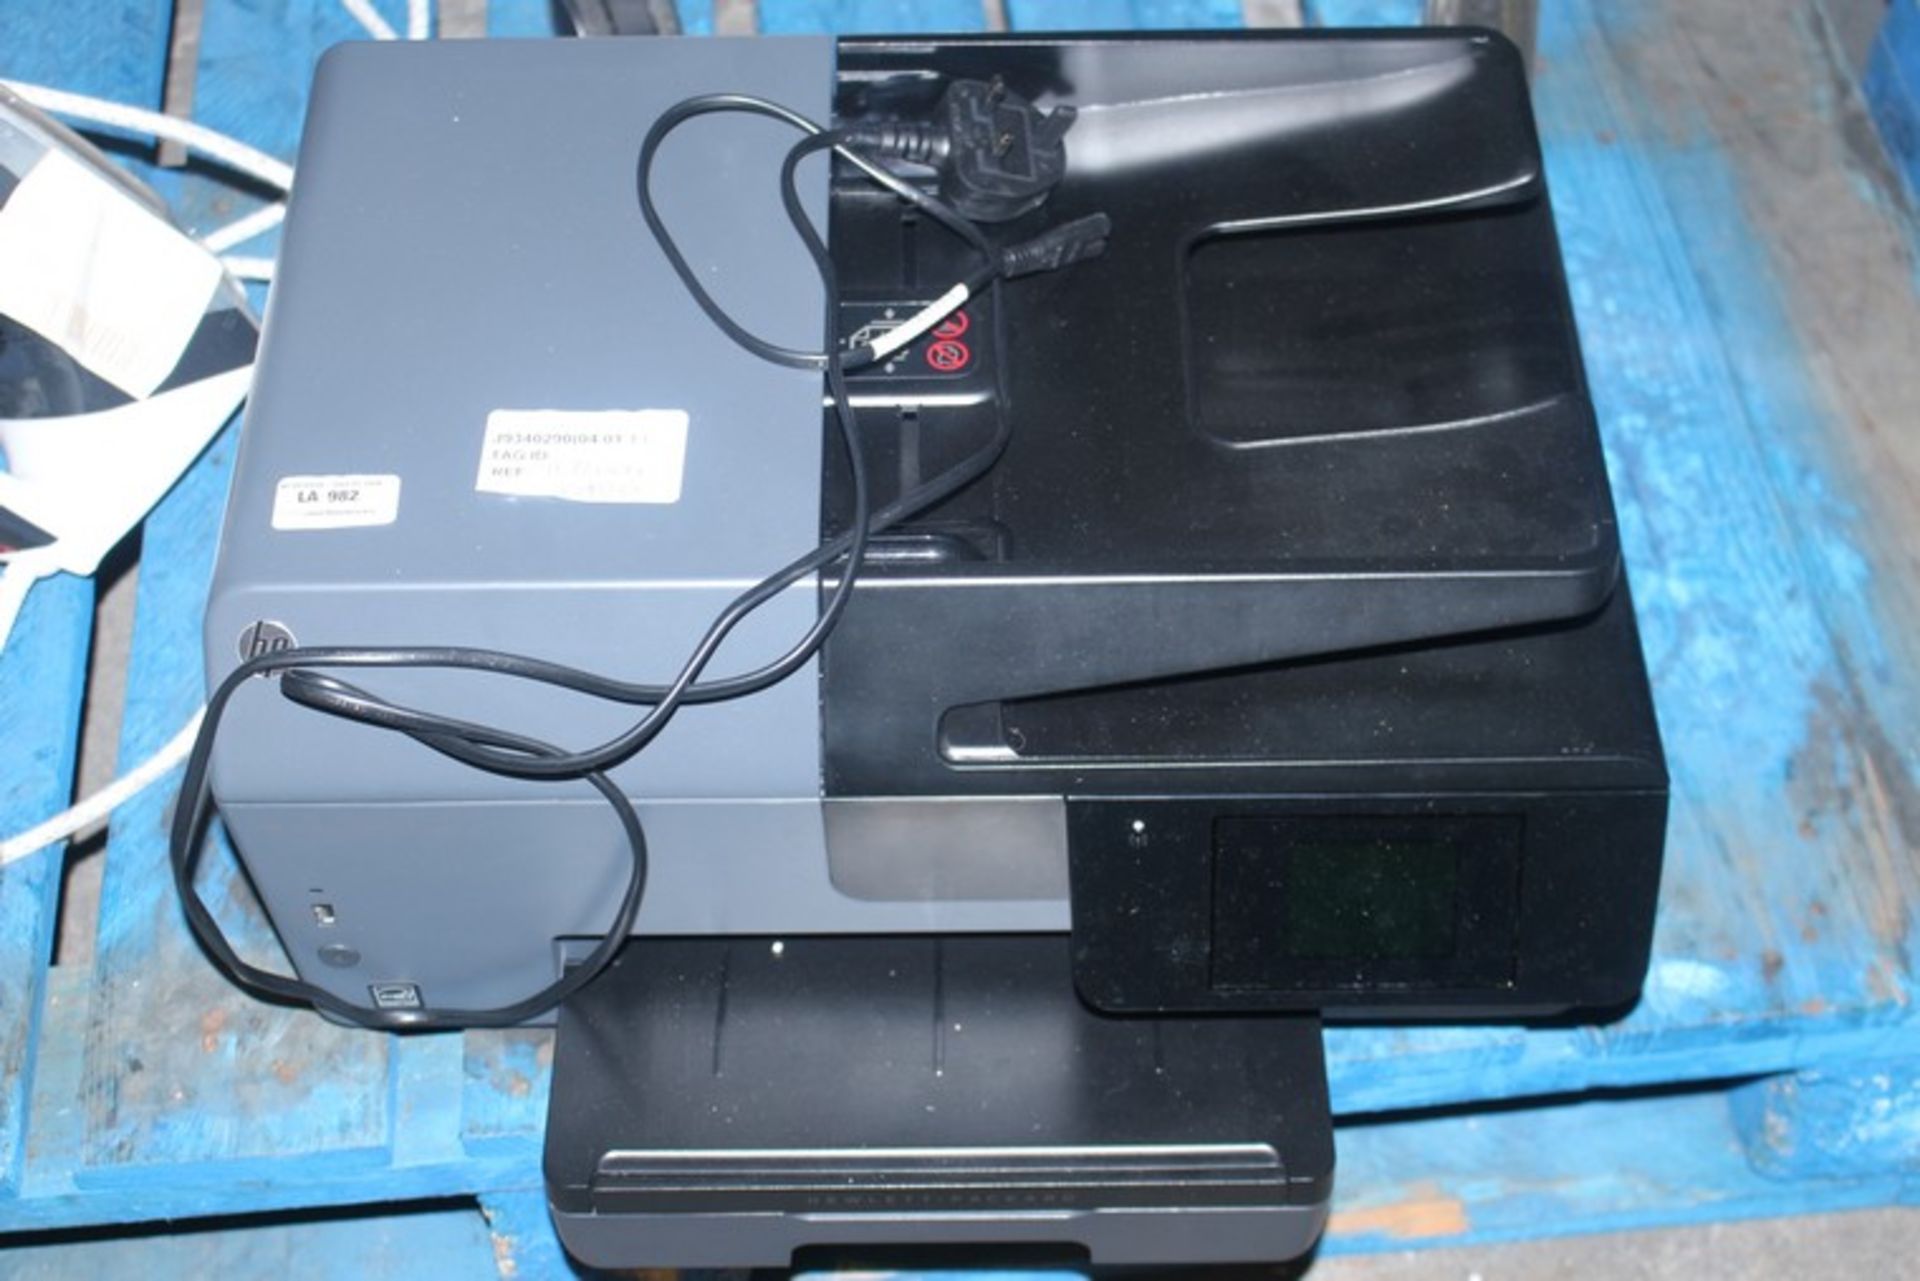 1 x HP OFFICE JET PRO 6830 PRINTER RRP £80 (04.01.18) *PLEASE NOTE THAT THE BID PRICE IS